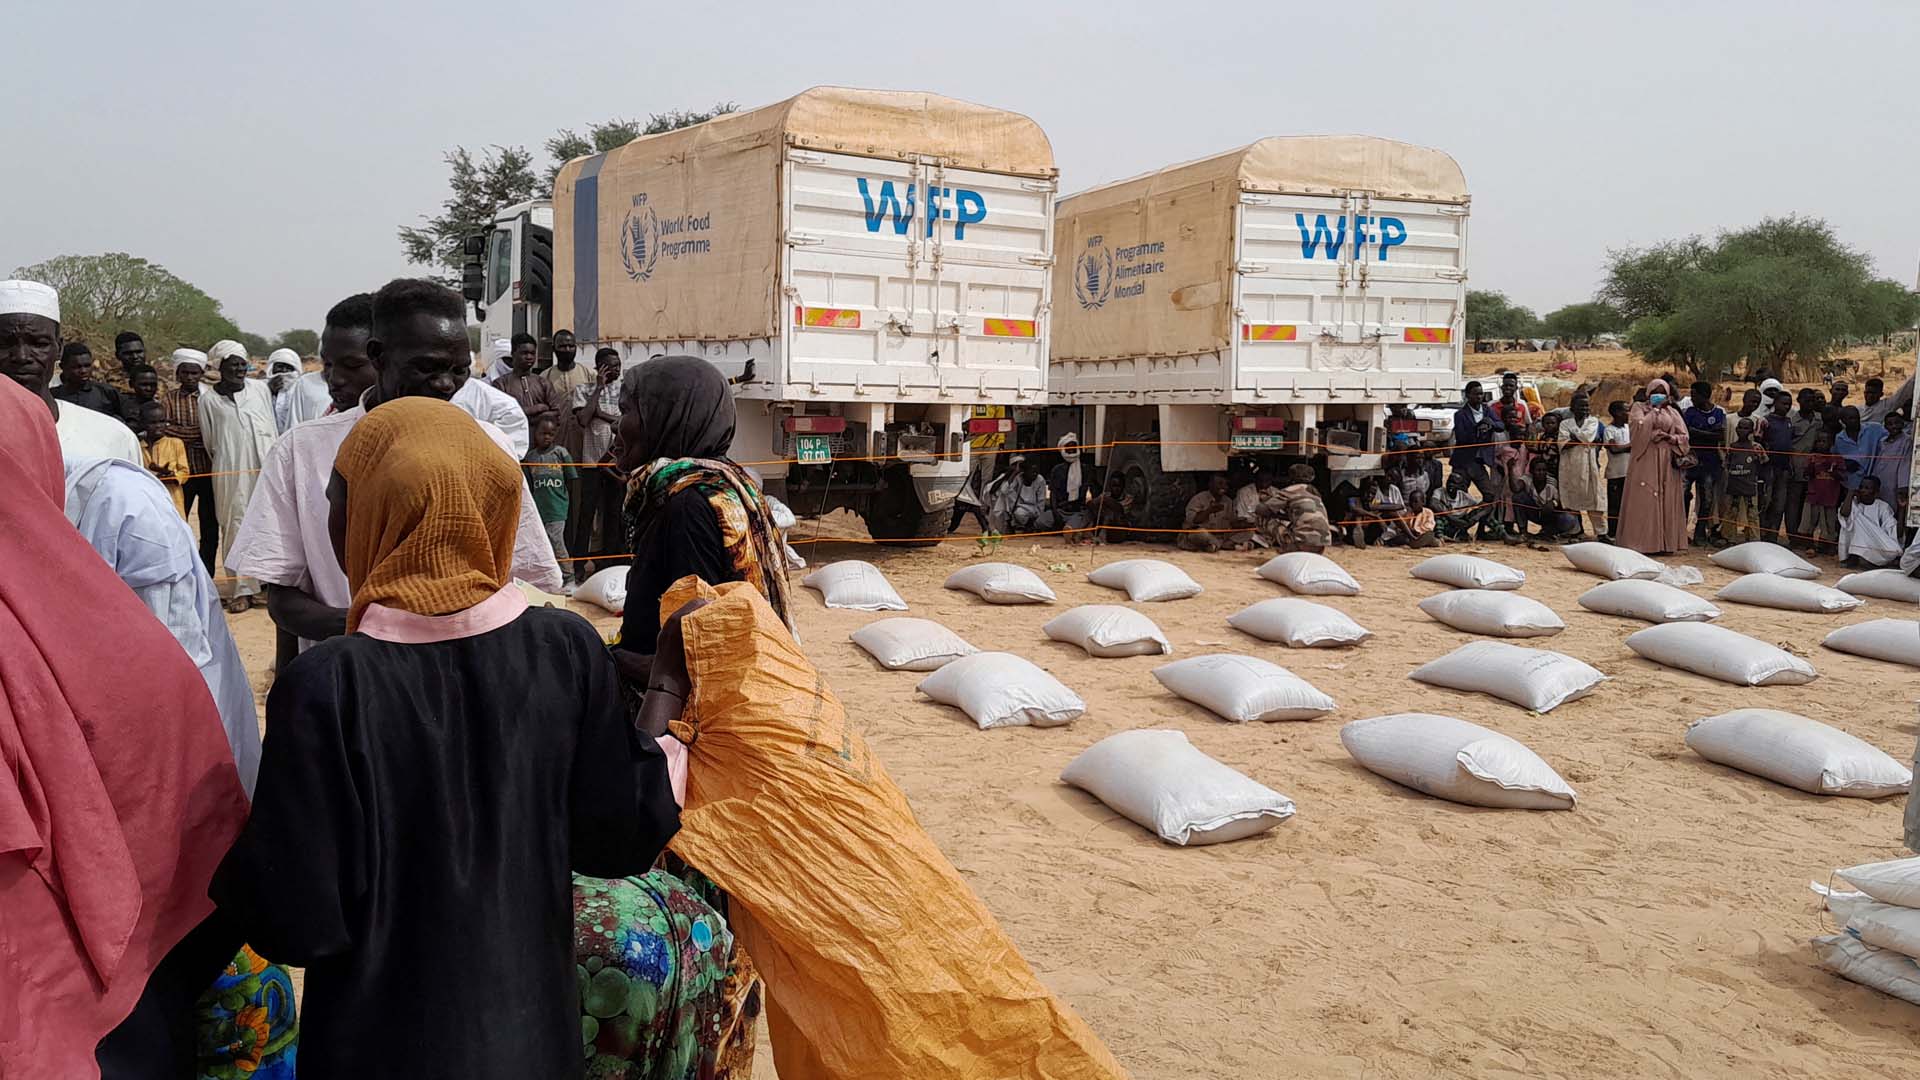 Pictured are Sudanese refugees at the side of the image waiting to receive aid in neighbouring Chad.  To the right we see two WFP trucks and on the floor sacks of food laid down in rows.